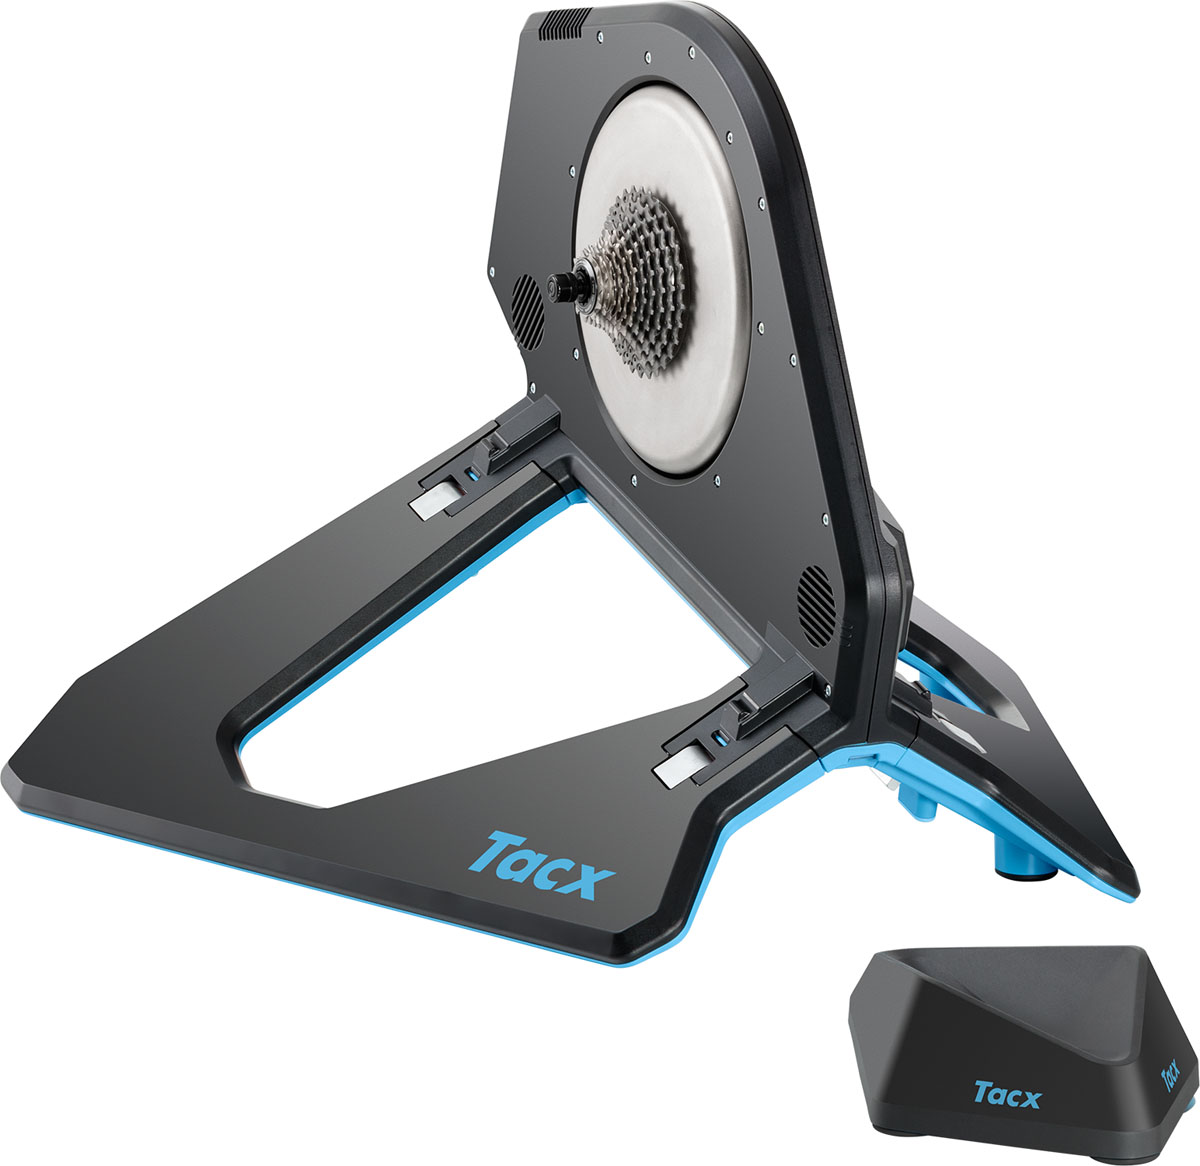 Tacx Neo 2 Smart Trainer adds pedal stroke analysis & updates for best ride yet